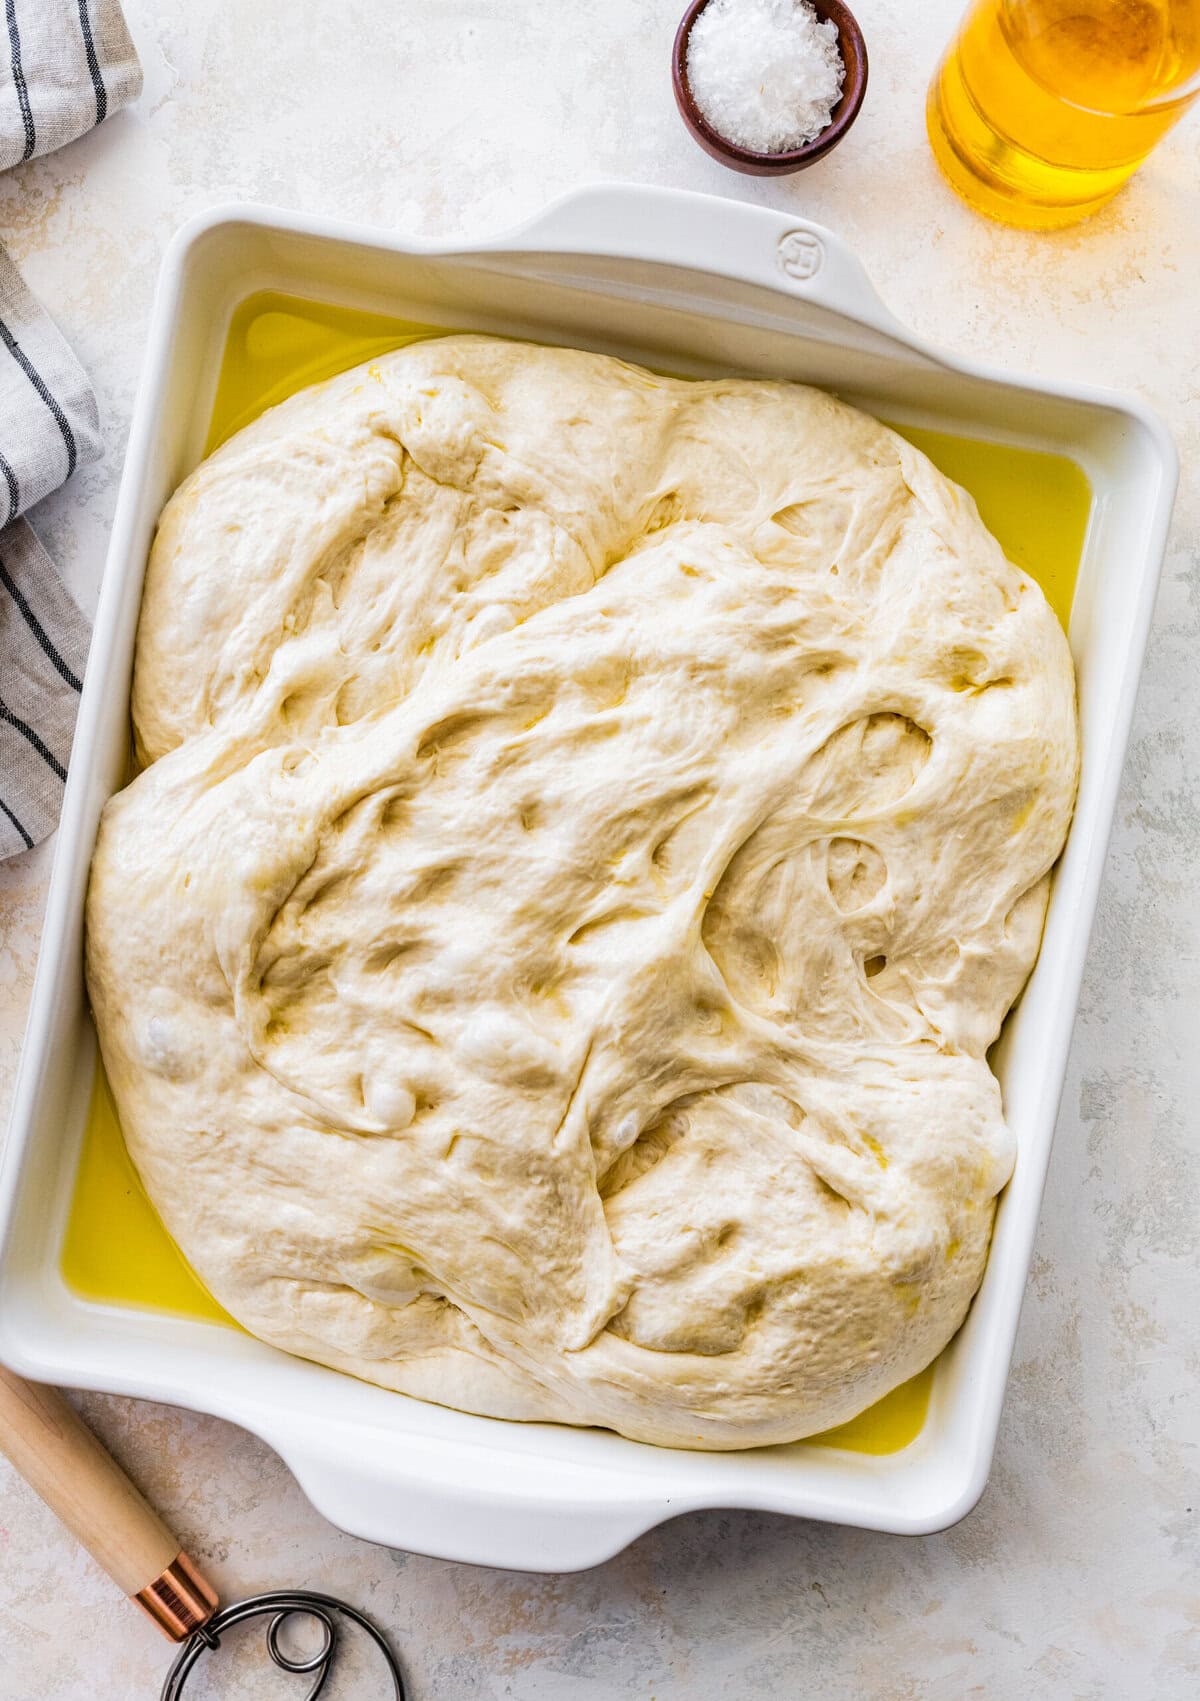 how to make no-knead focaccia bread step-by-step: Add the dough to a well oiled baking dish. Let it rise again.